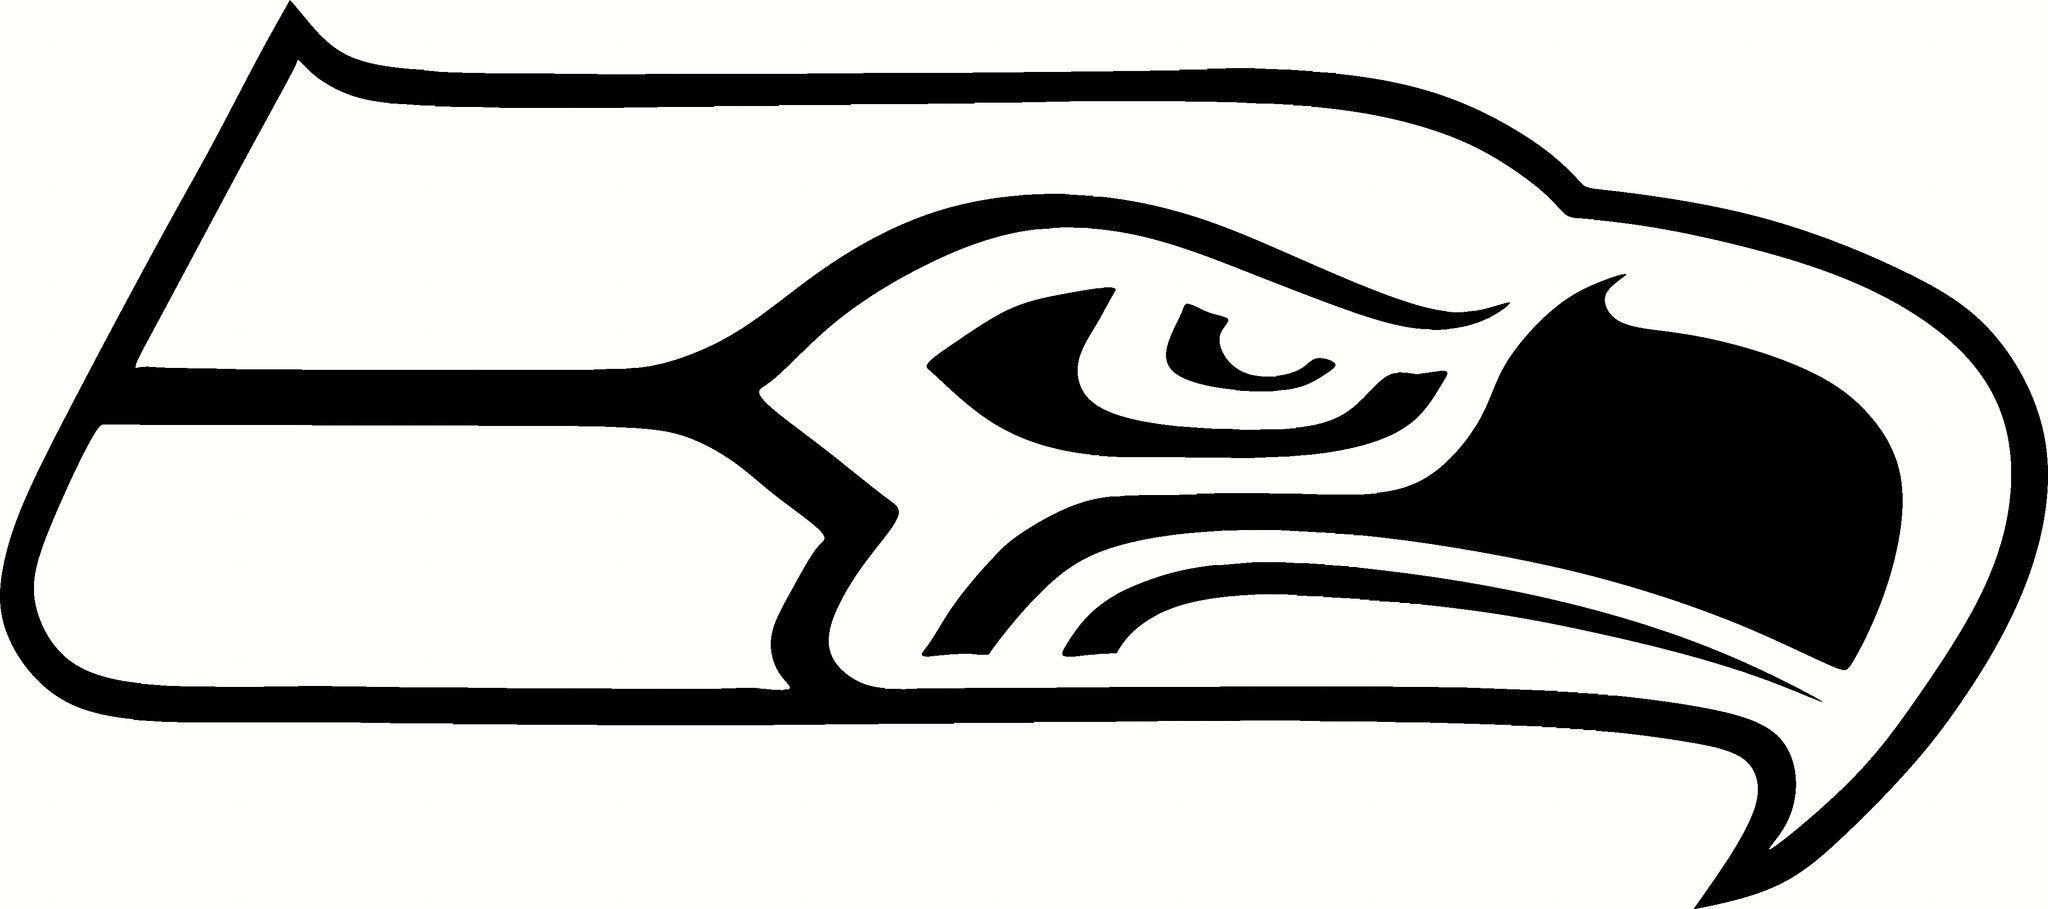 Black and White Seahawks Logo - Seattle Seahawks LOGO Vinyl Cut Out Decal - Choose your Color and ...